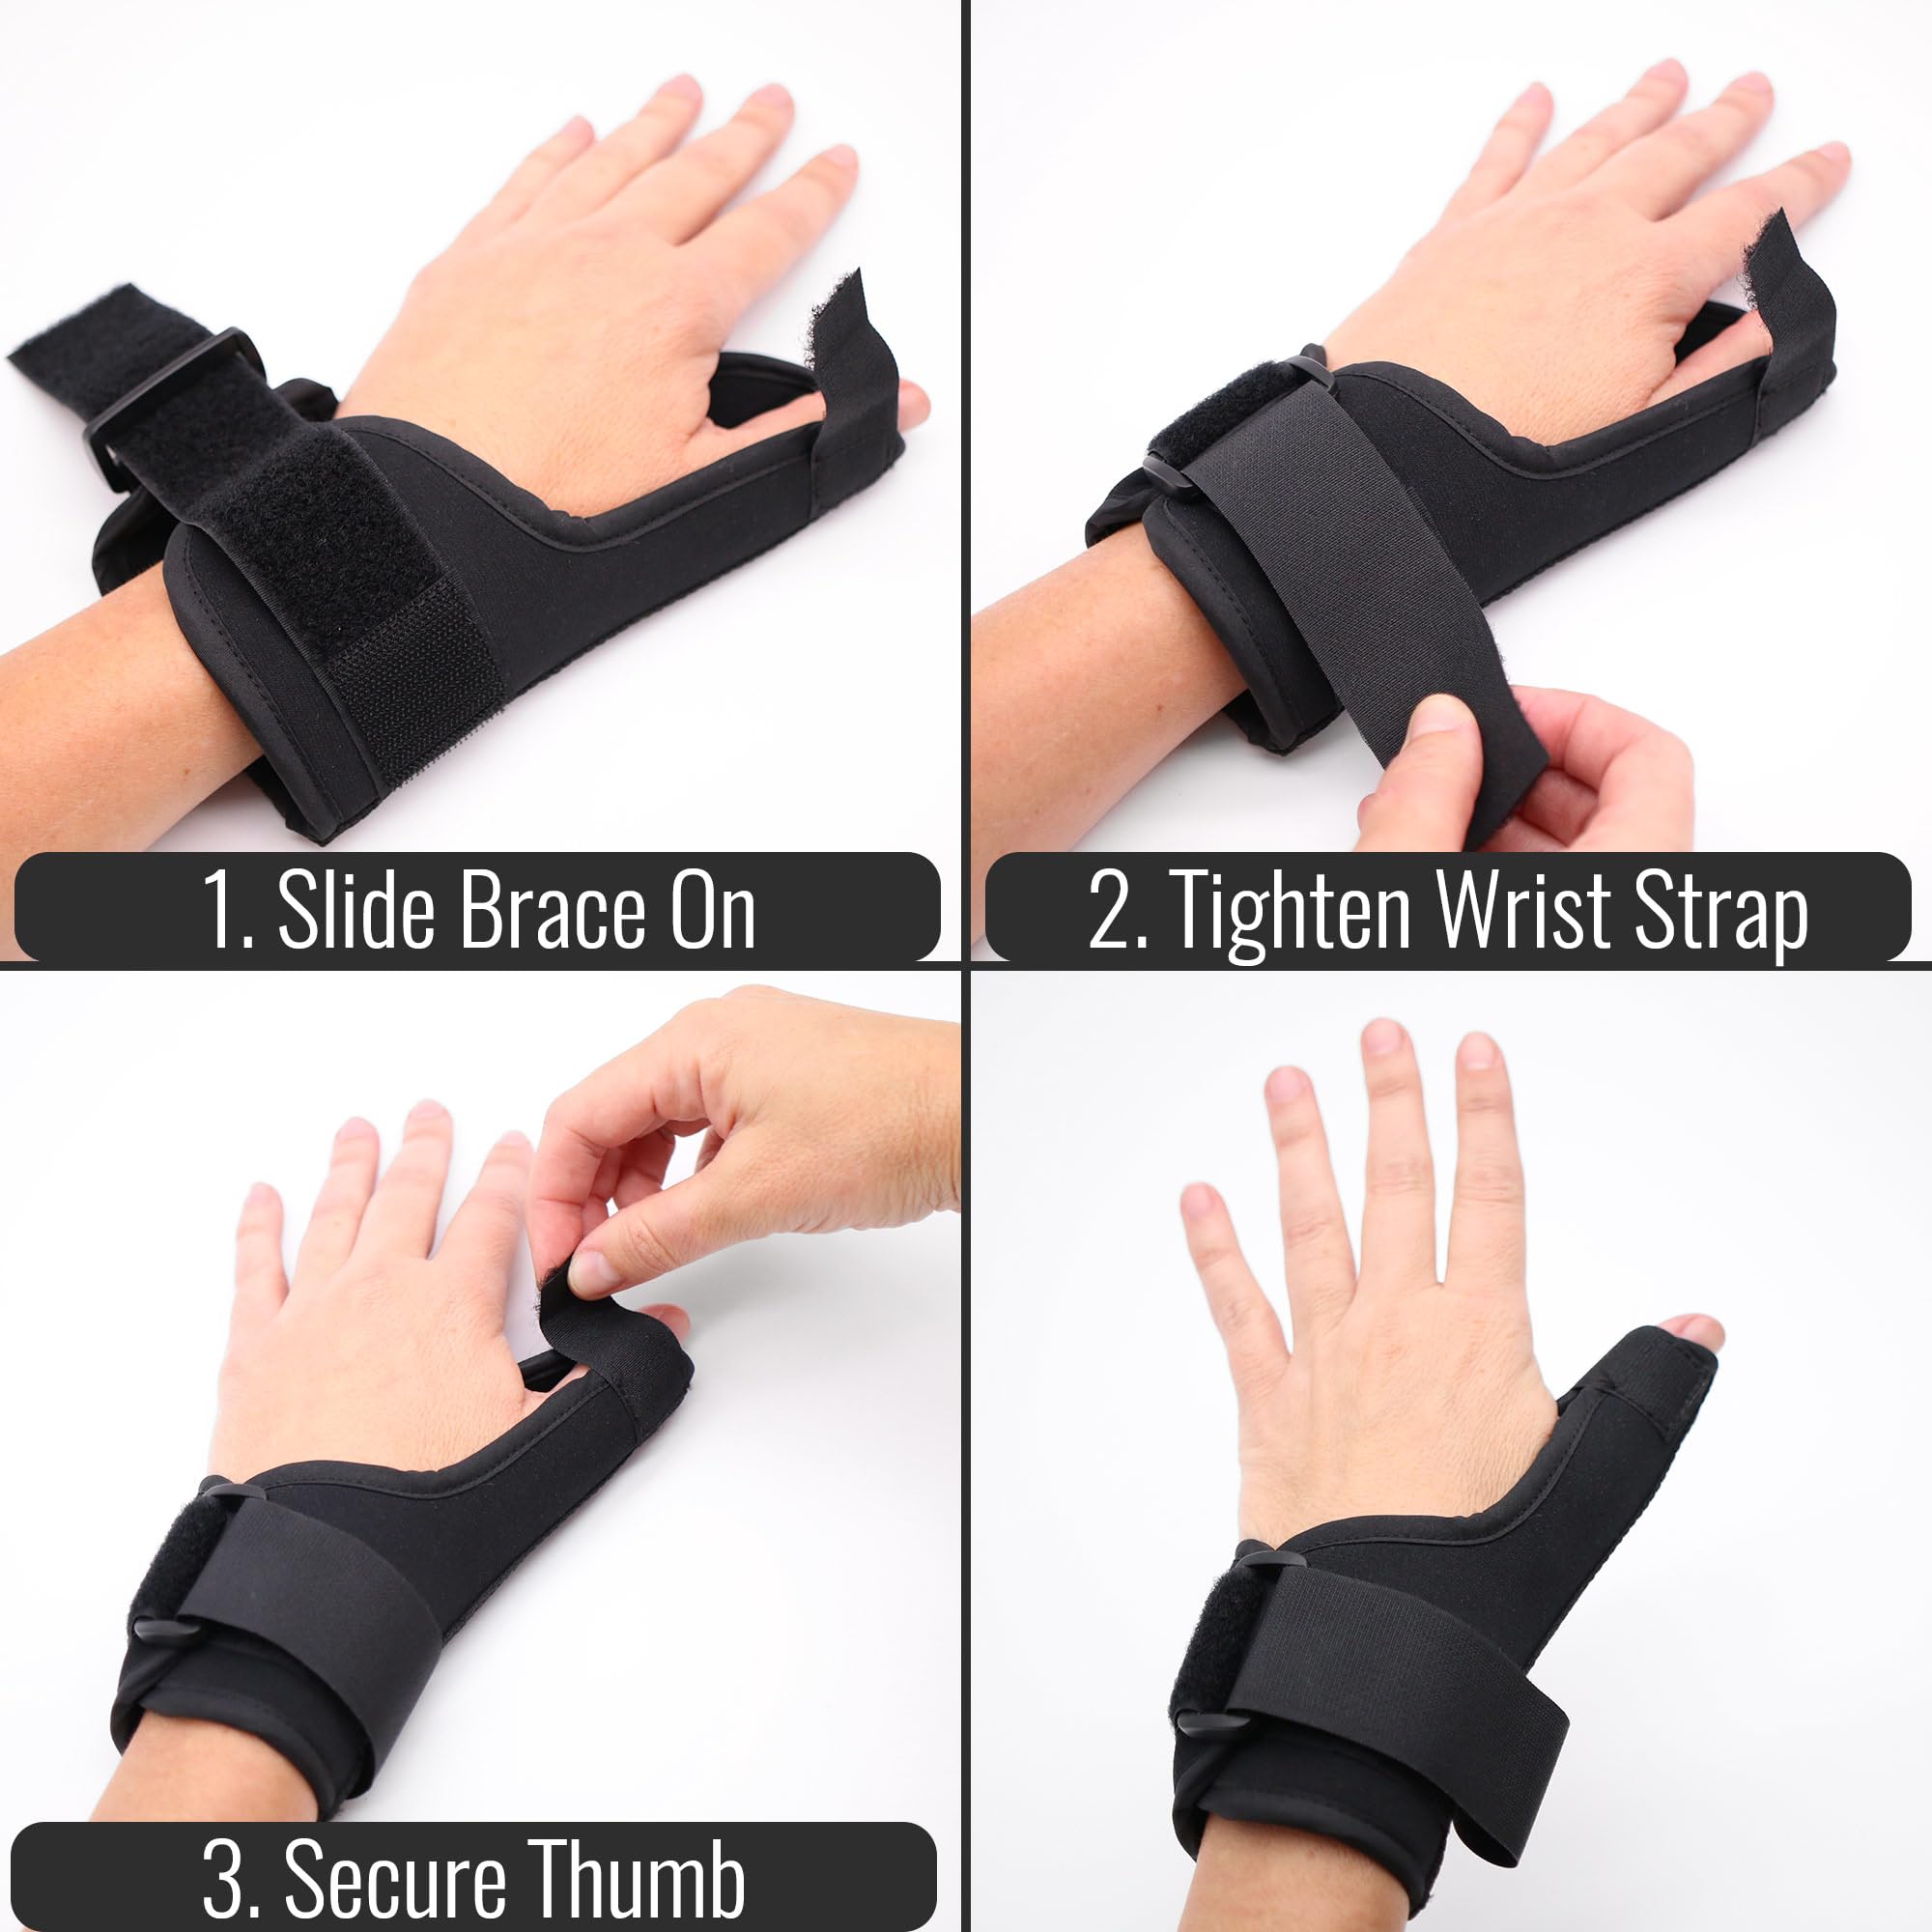 Heelbo Adjustable Thumb Brace & Wrist Strap, Fits Left or Right Wrist, FSA & HSA Eligible, Isolates and Stabilizes for Sprains, Fractures, Arthritis and Chronic Conditions